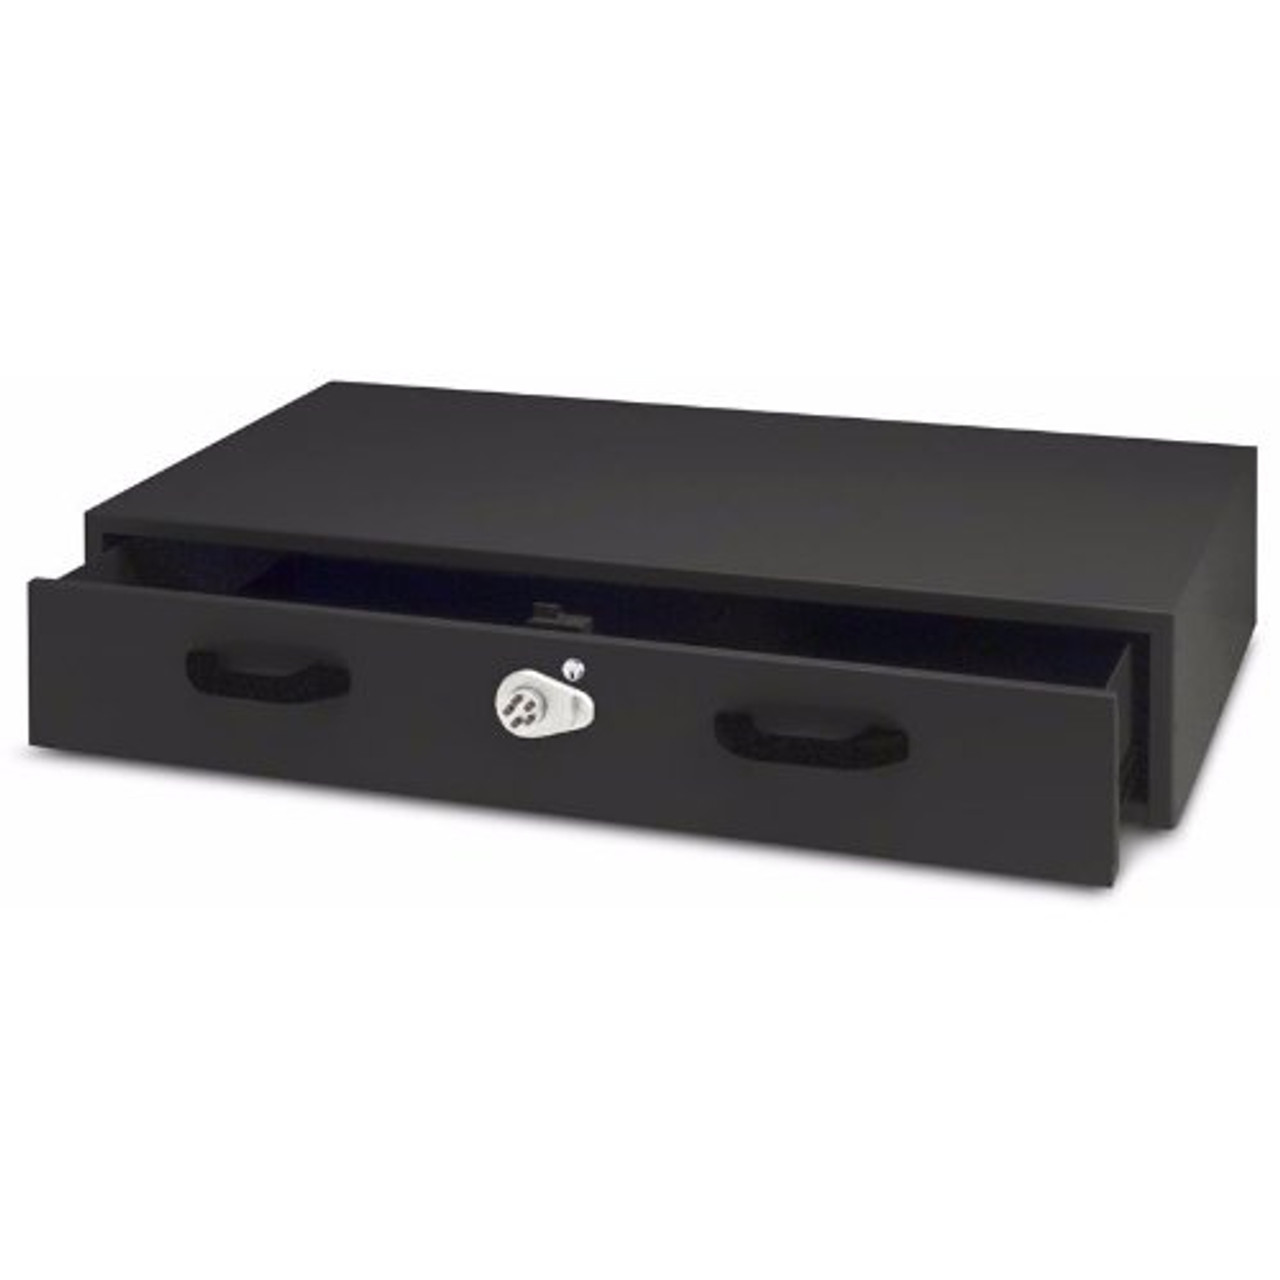 Tufloc 36-015 TufBox Security Drawers Dodge Charger: 8X34X20, Secure Weapon Lock Box, Combination or T-Handle Lock, Optional Drawer Base, Foam Insert, Motion Activated Interior LED Light, Black